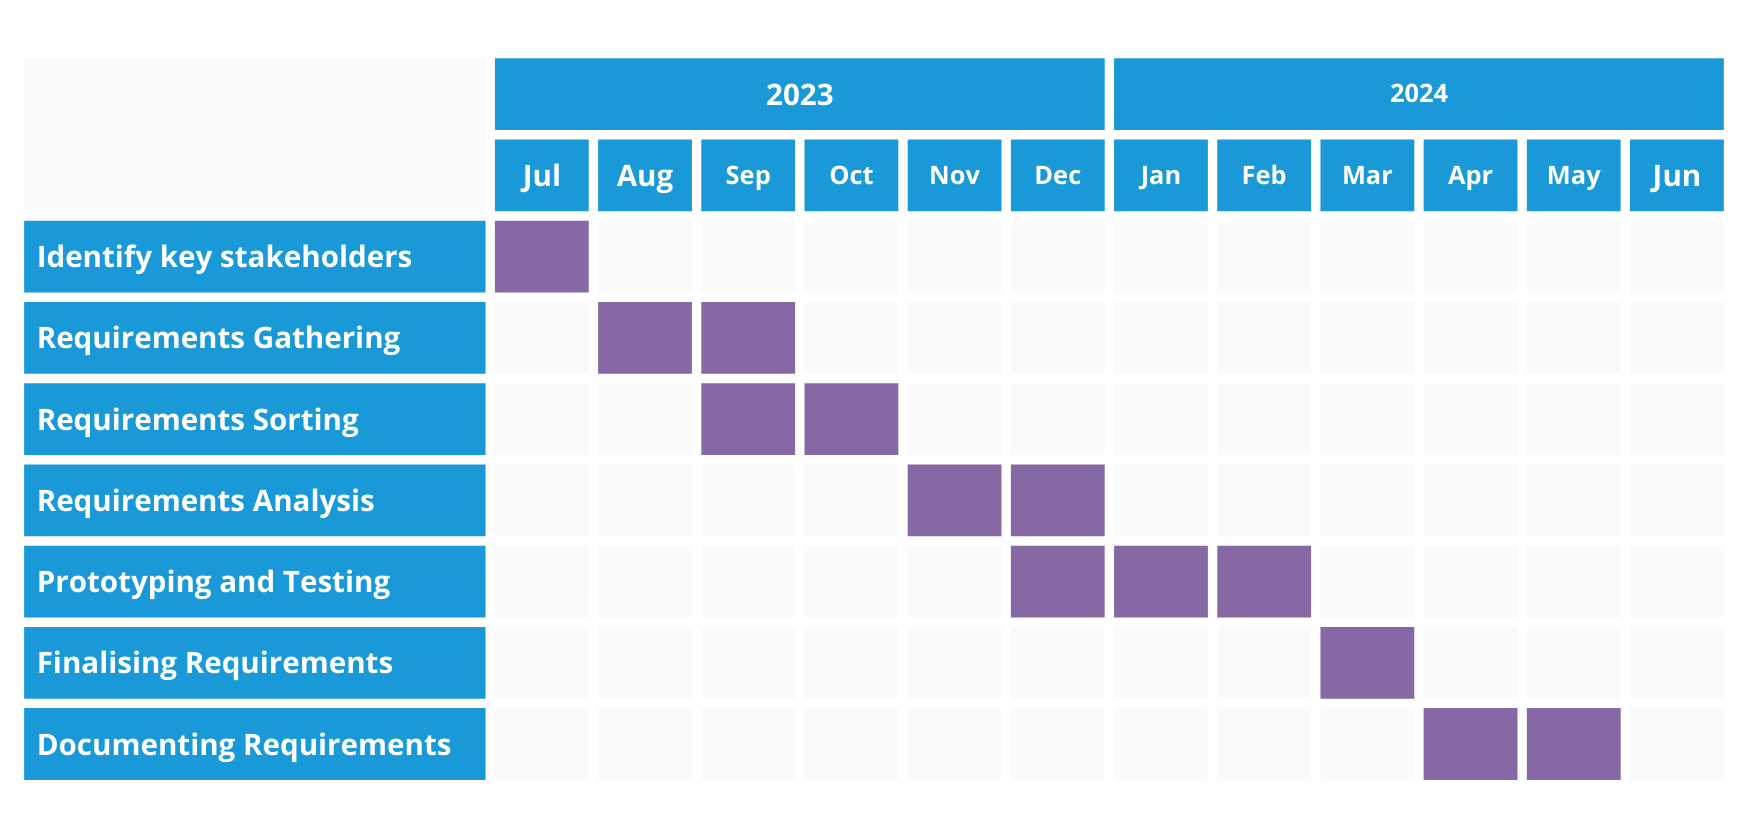 The image displays a Gantt chart, which is a type of bar chart that illustrates a project schedule. This Gantt chart is used to plan and track the stages of a project related to software development requirements over a time period from July 2023 to June 2024. Each task is listed on the left side of the chart, and the timeline is marked across the top. The tasks listed are: Identify Key Stakeholders Requirements Gathering Requirements Sorting Requirements Analysis Prototyping and Testing Finalising Requirements Documenting Requirements Colored bars (purple in this case) across the timeline indicate when a particular task is scheduled to begin and end. The chart shows the duration of each task and their respective start and end months. For example, "Requirements Gathering" begins in July and continues through August, while "Requirements Analysis" starts in October and extends to December. Some tasks overlap, suggesting that multiple activities are happening concurrently. Gantt charts are commonly used in project management to provide a visual timeline for all tasks involved in a project and to track the progress against their scheduled time frames.